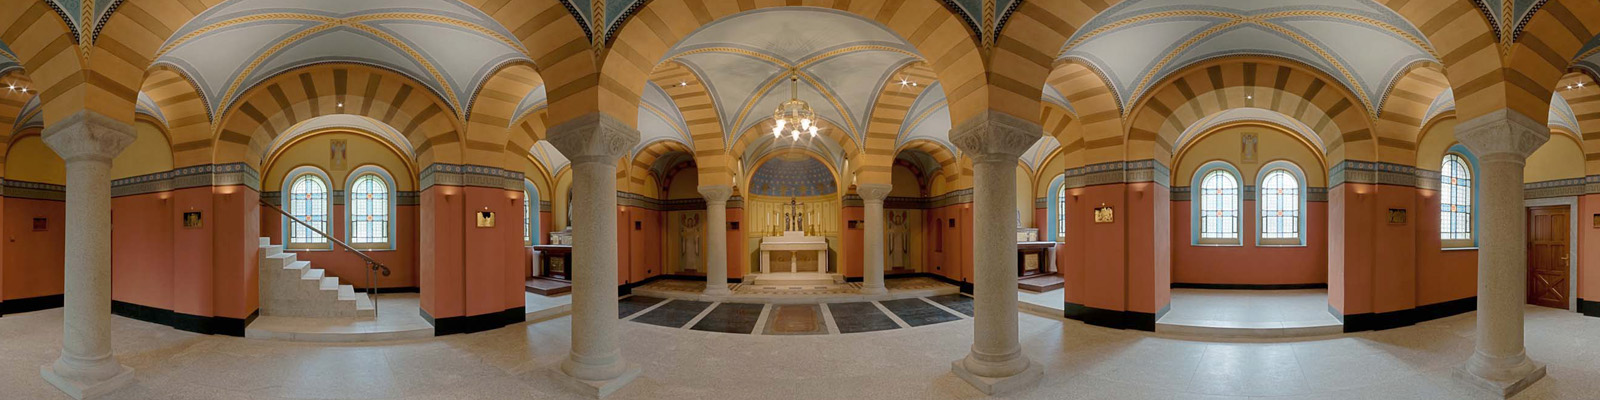 Kloster Beuron 360° Panorama